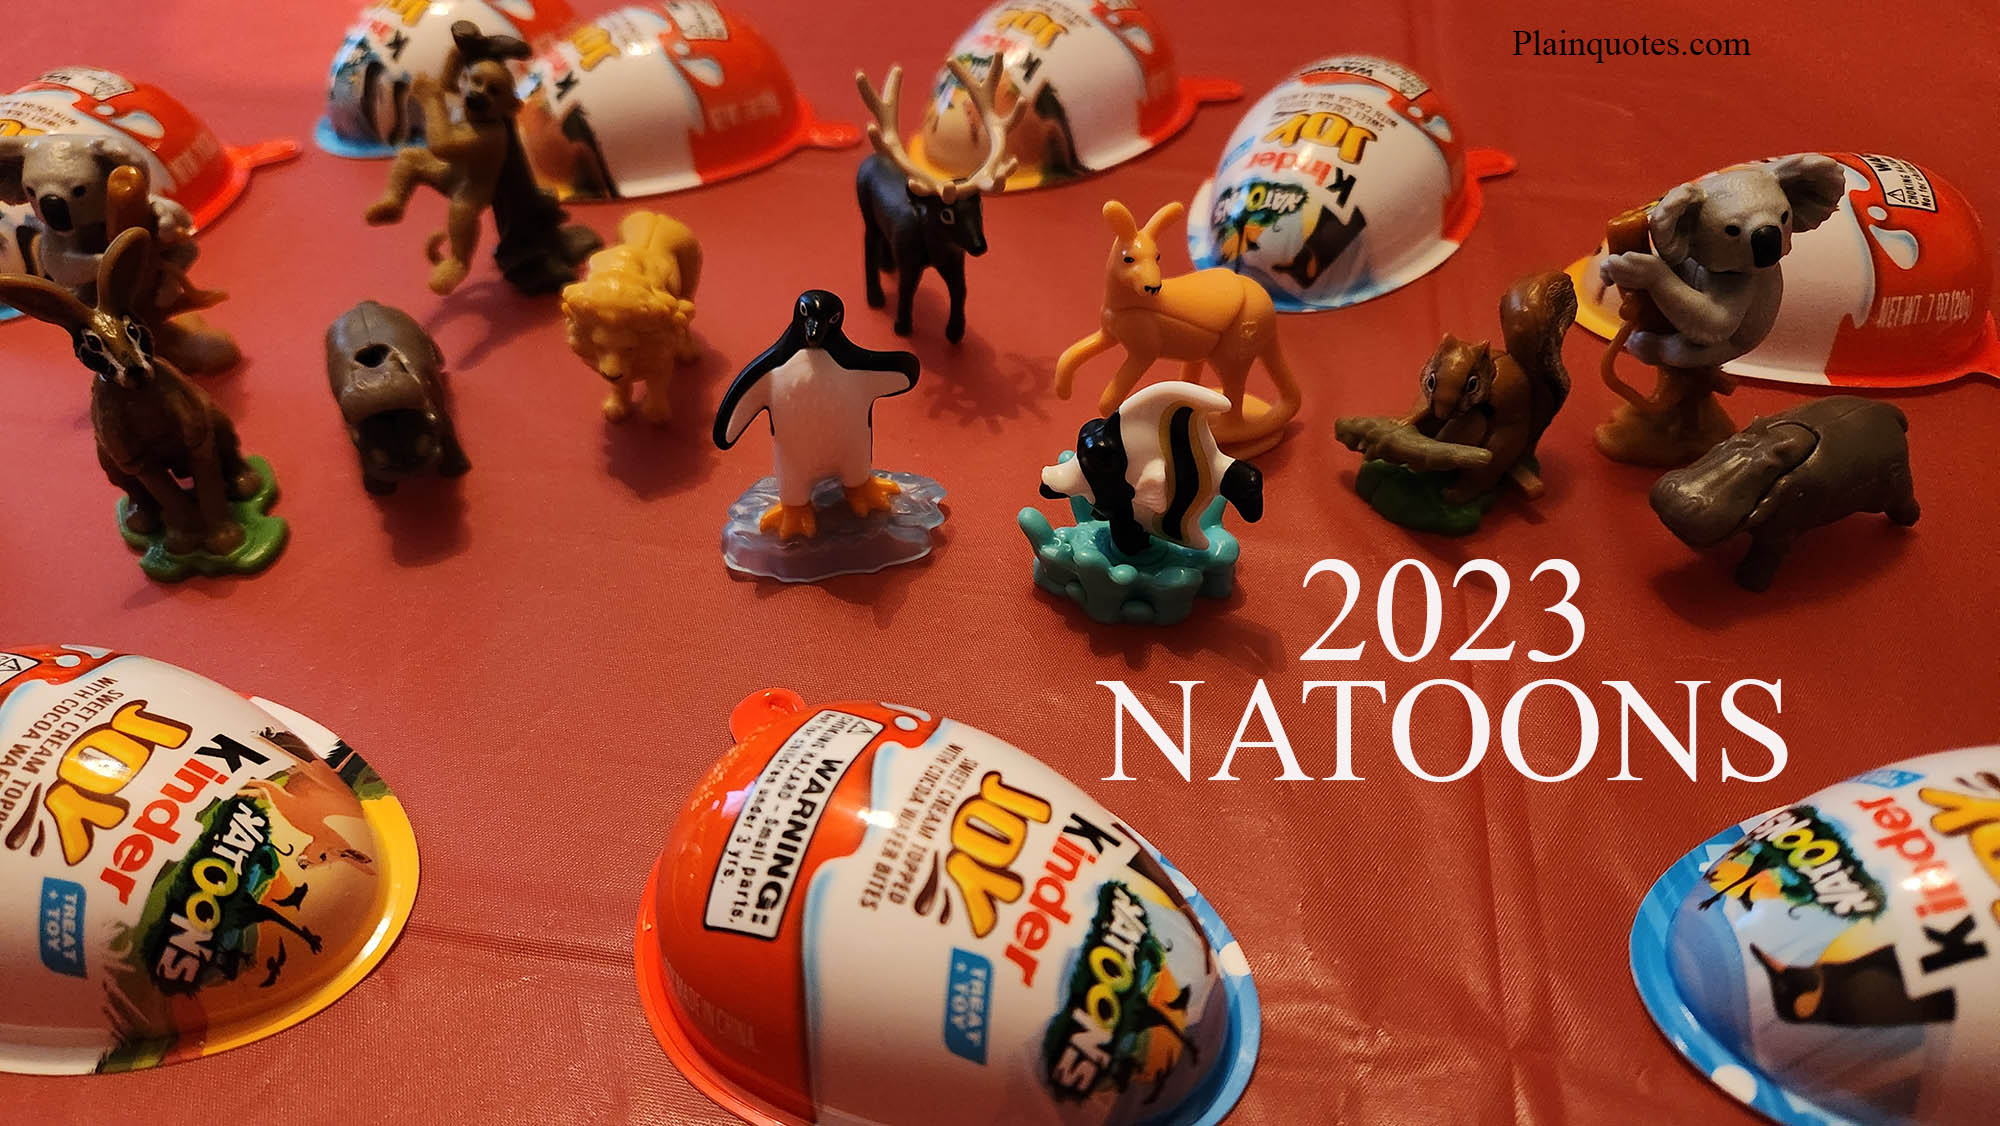 2023 NATOONS Kinder Joy Eggs From Costco, 48 OFF